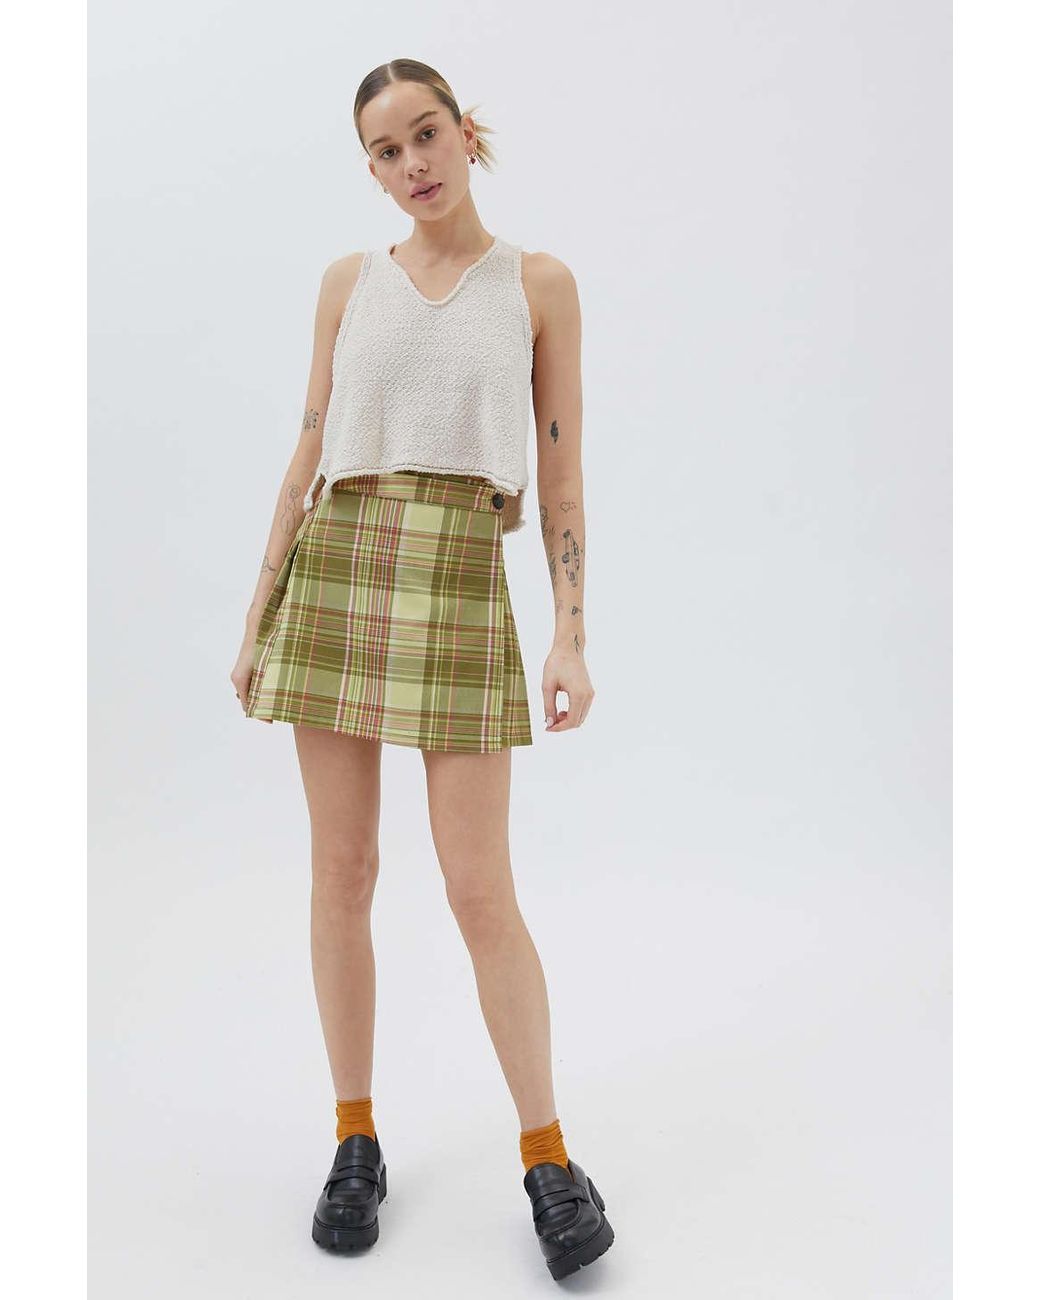 Urban Outfitters Uo Patterned Pleated Mini Skirt in Green - Lyst